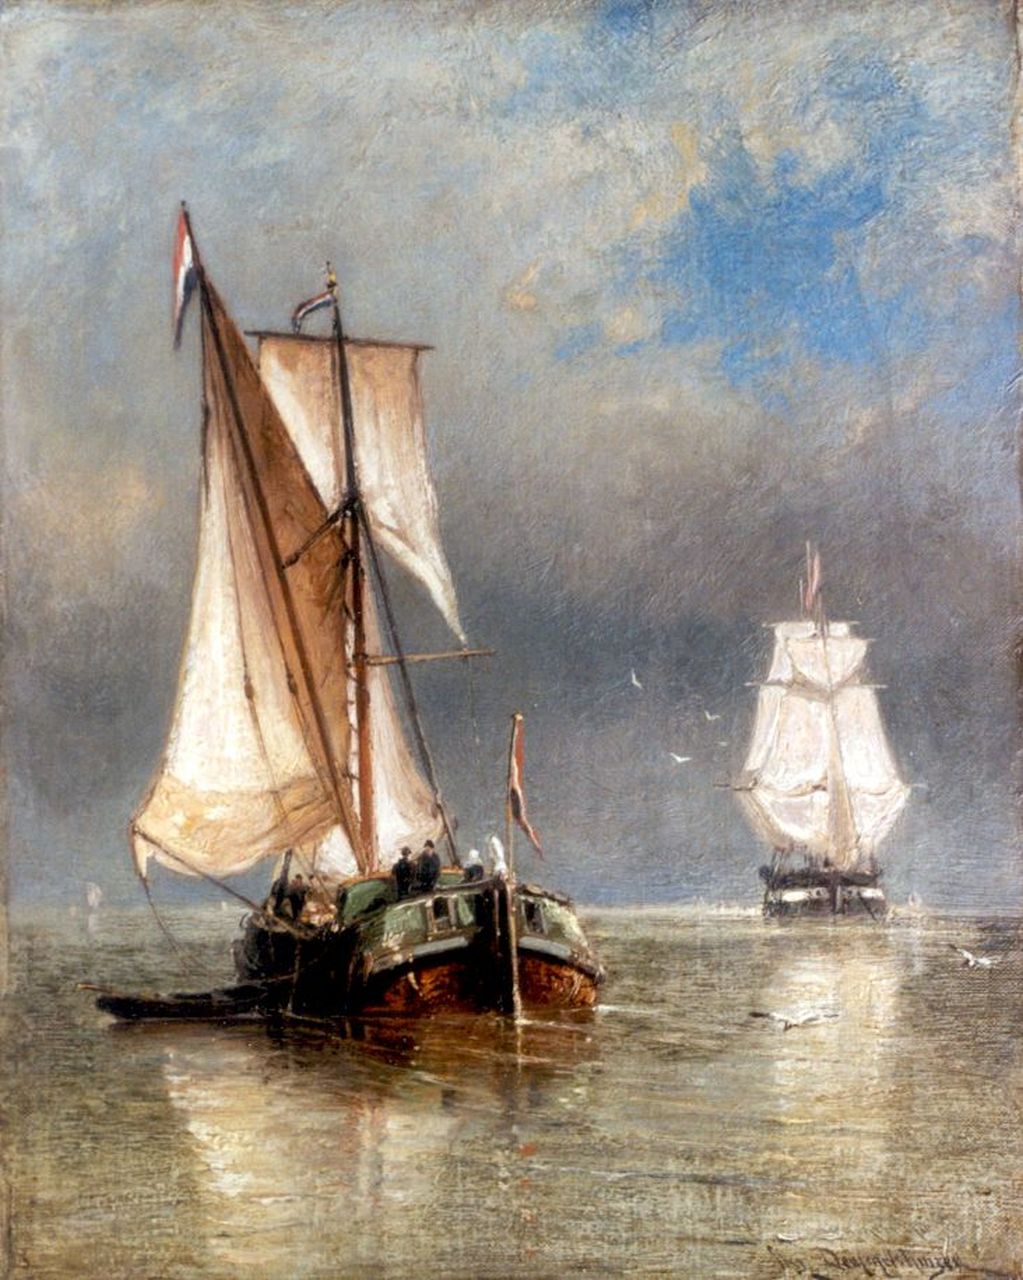 Dommelshuizen C.C.  | Cornelis Christiaan Dommelshuizen, Shipping on the Zuiderzee, oil on canvas 39.2 x 31.2 cm, signed l.r.